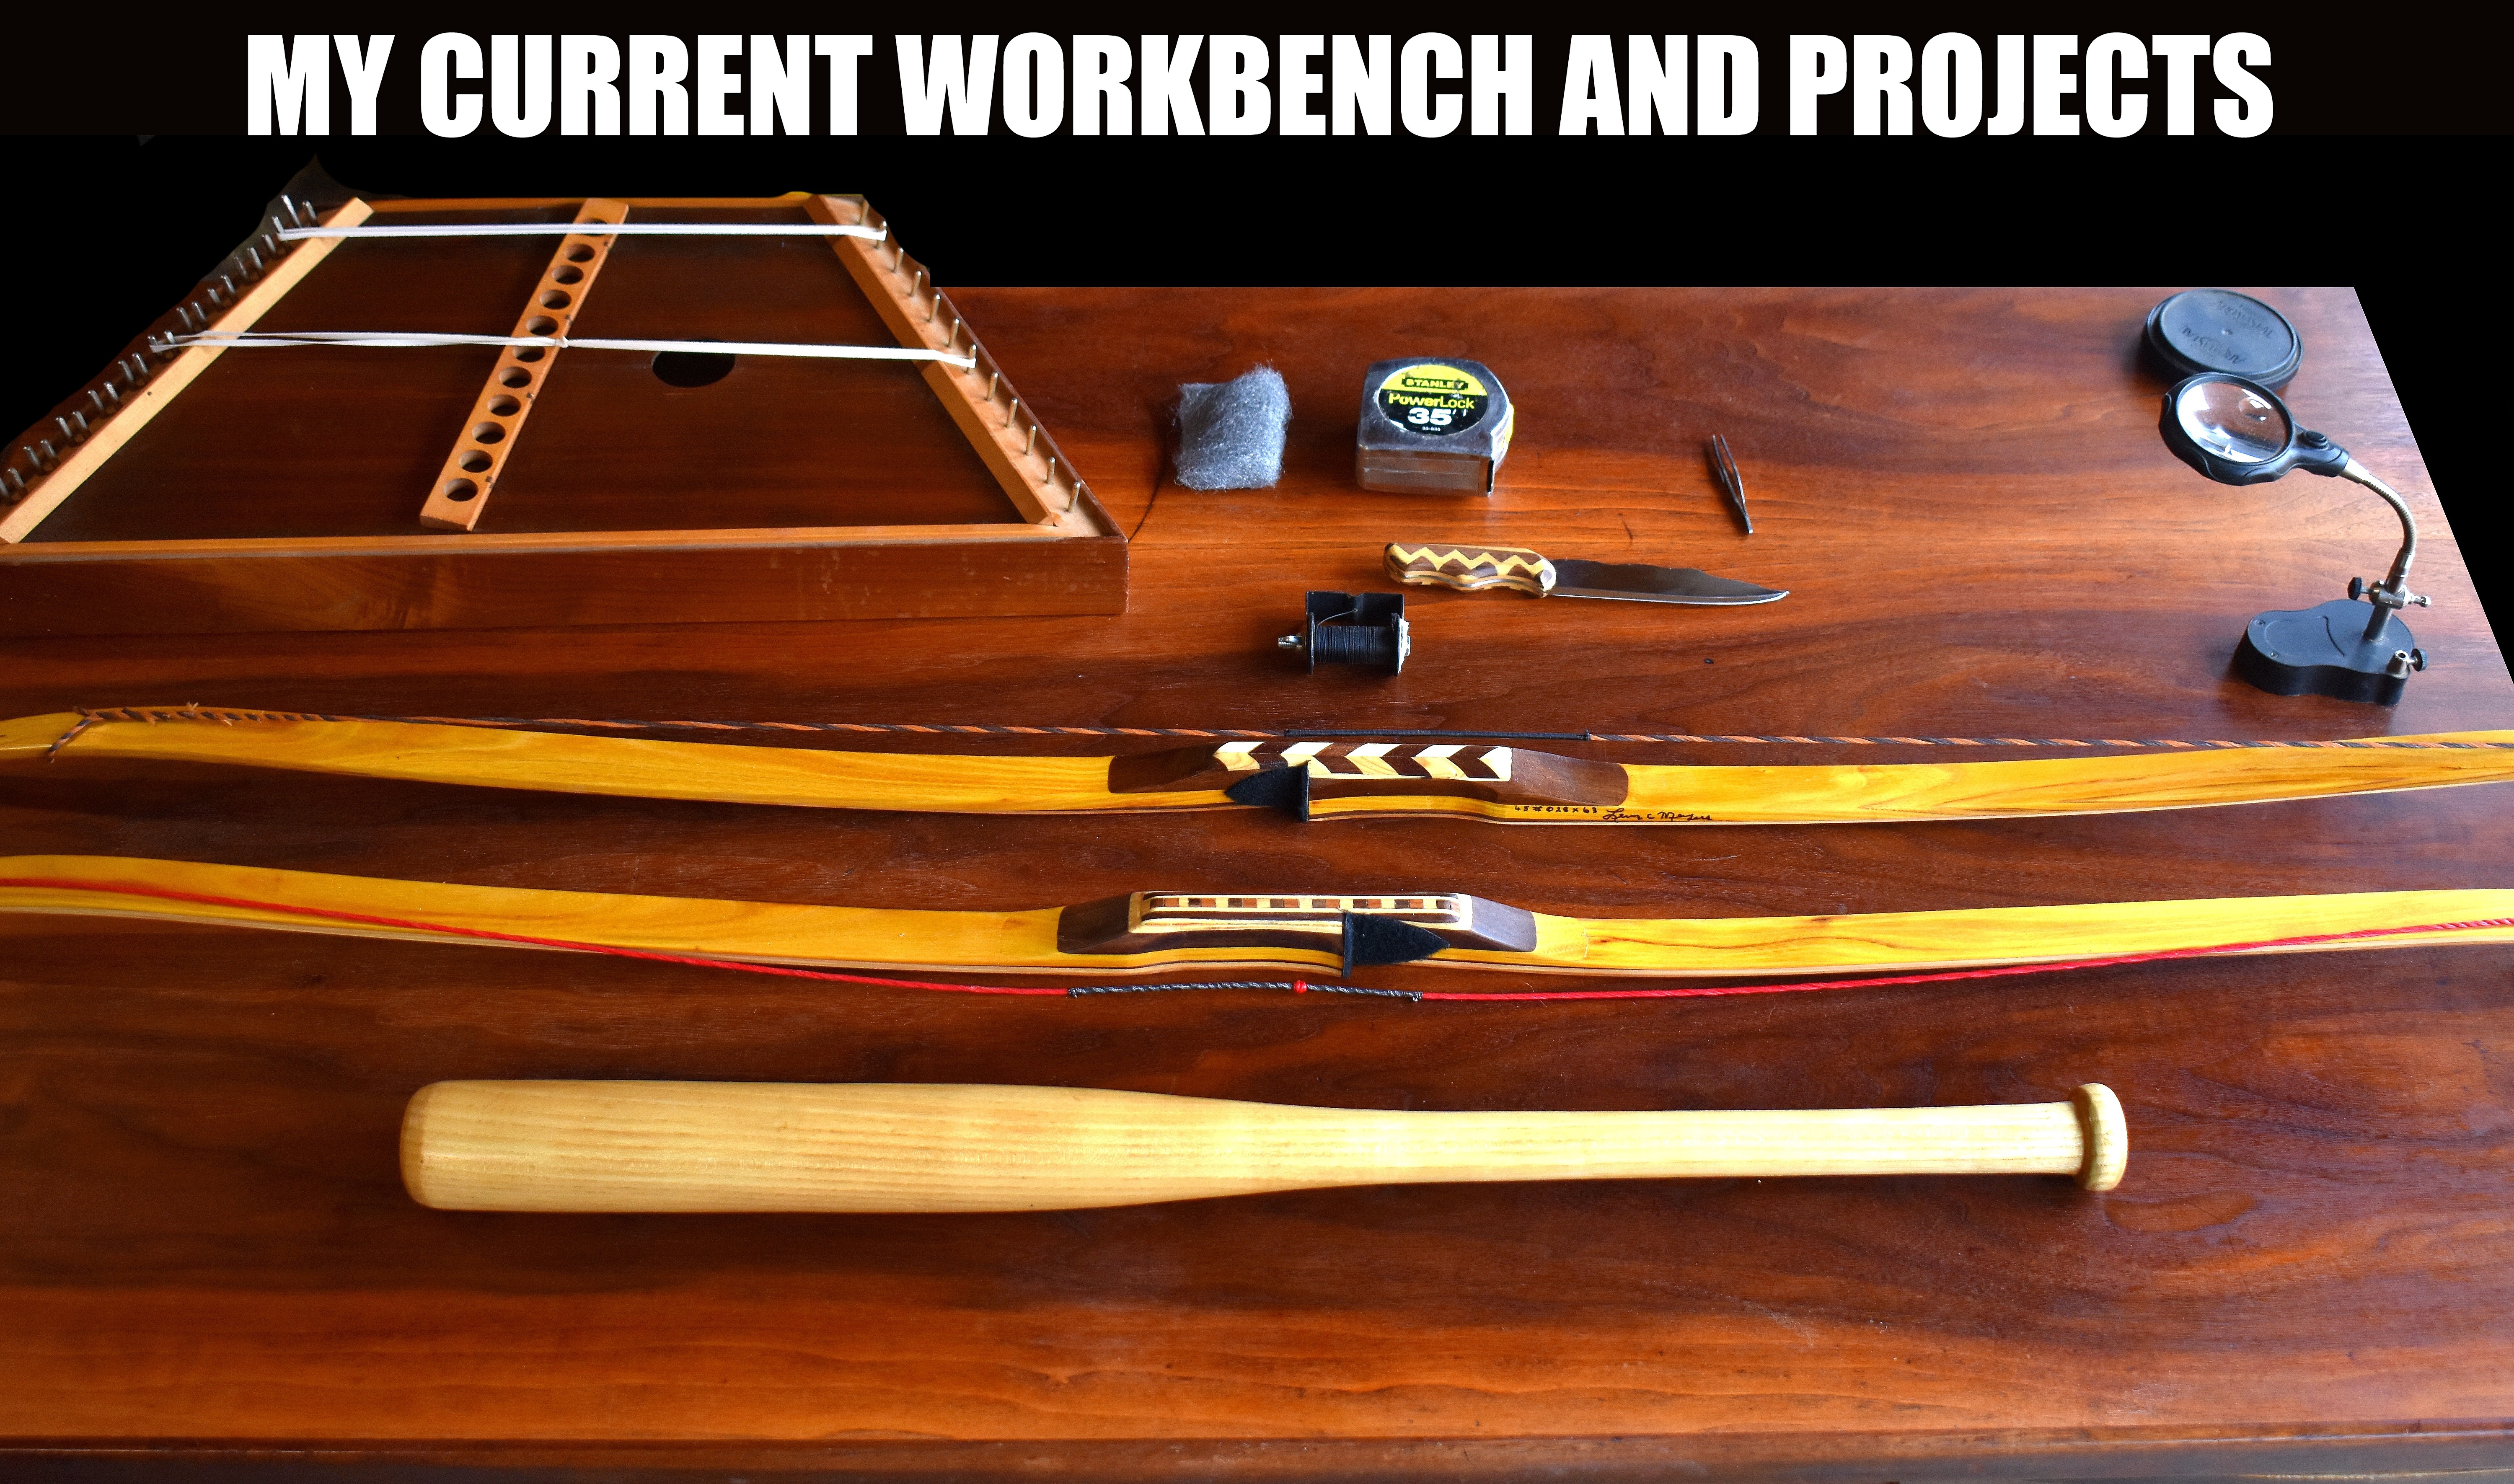 My current workbench and projects | MY CURRENT WORKBENCH AND PROJECTS | image tagged in workbench,kewlew | made w/ Imgflip meme maker